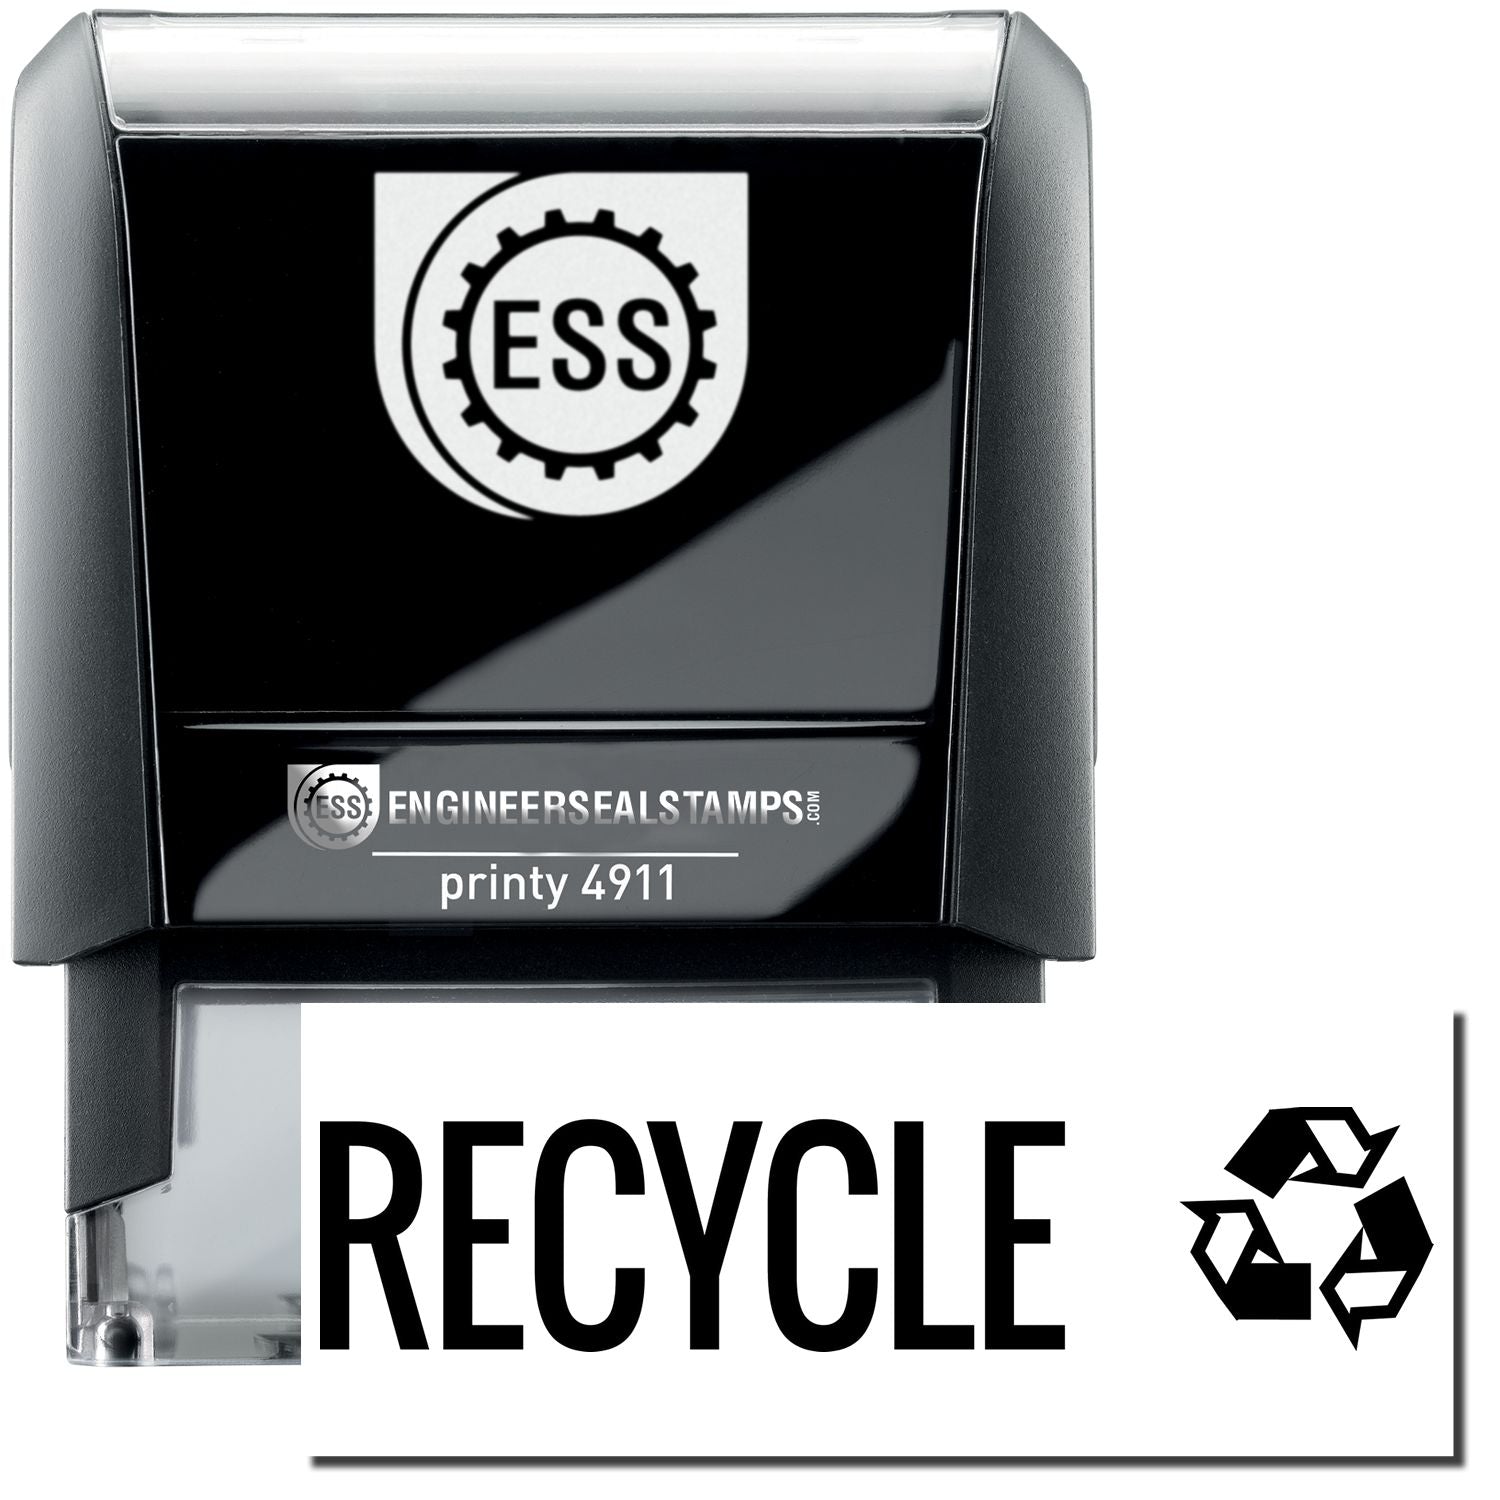 A self-inking stamp with a stamped image showing how the text "RECYCLE" with the recycling icon on the right side is displayed after stamping.